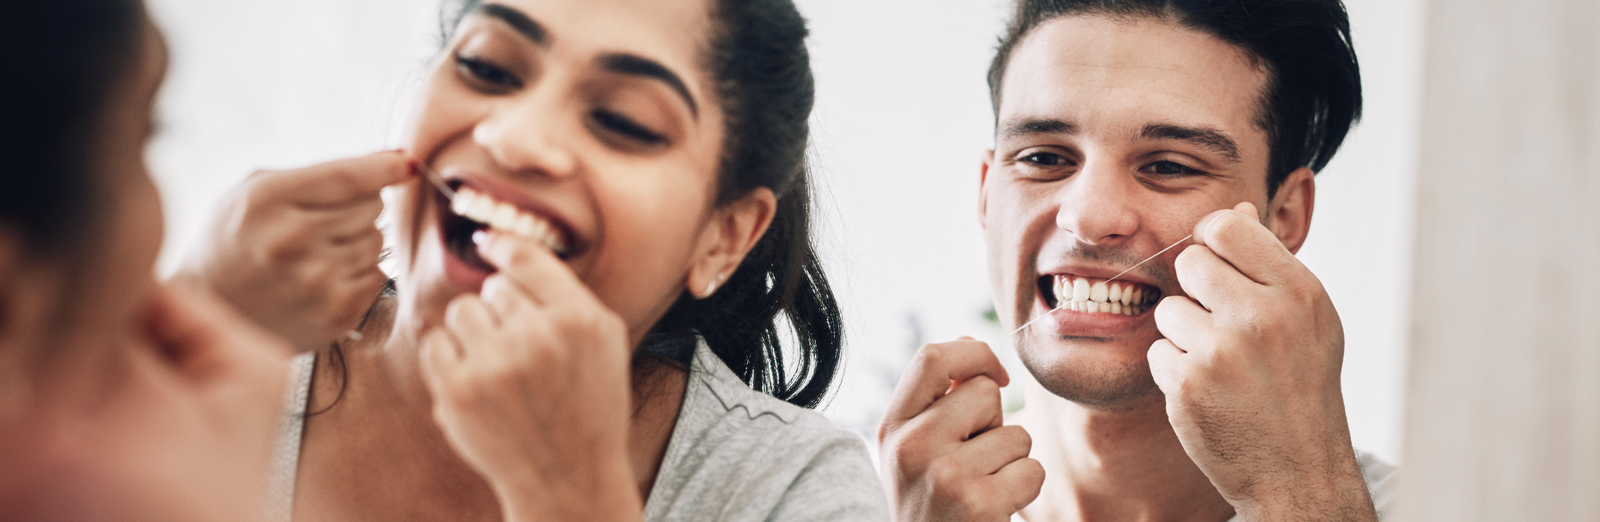 couple-flossing-in-mirror-1600x522.png